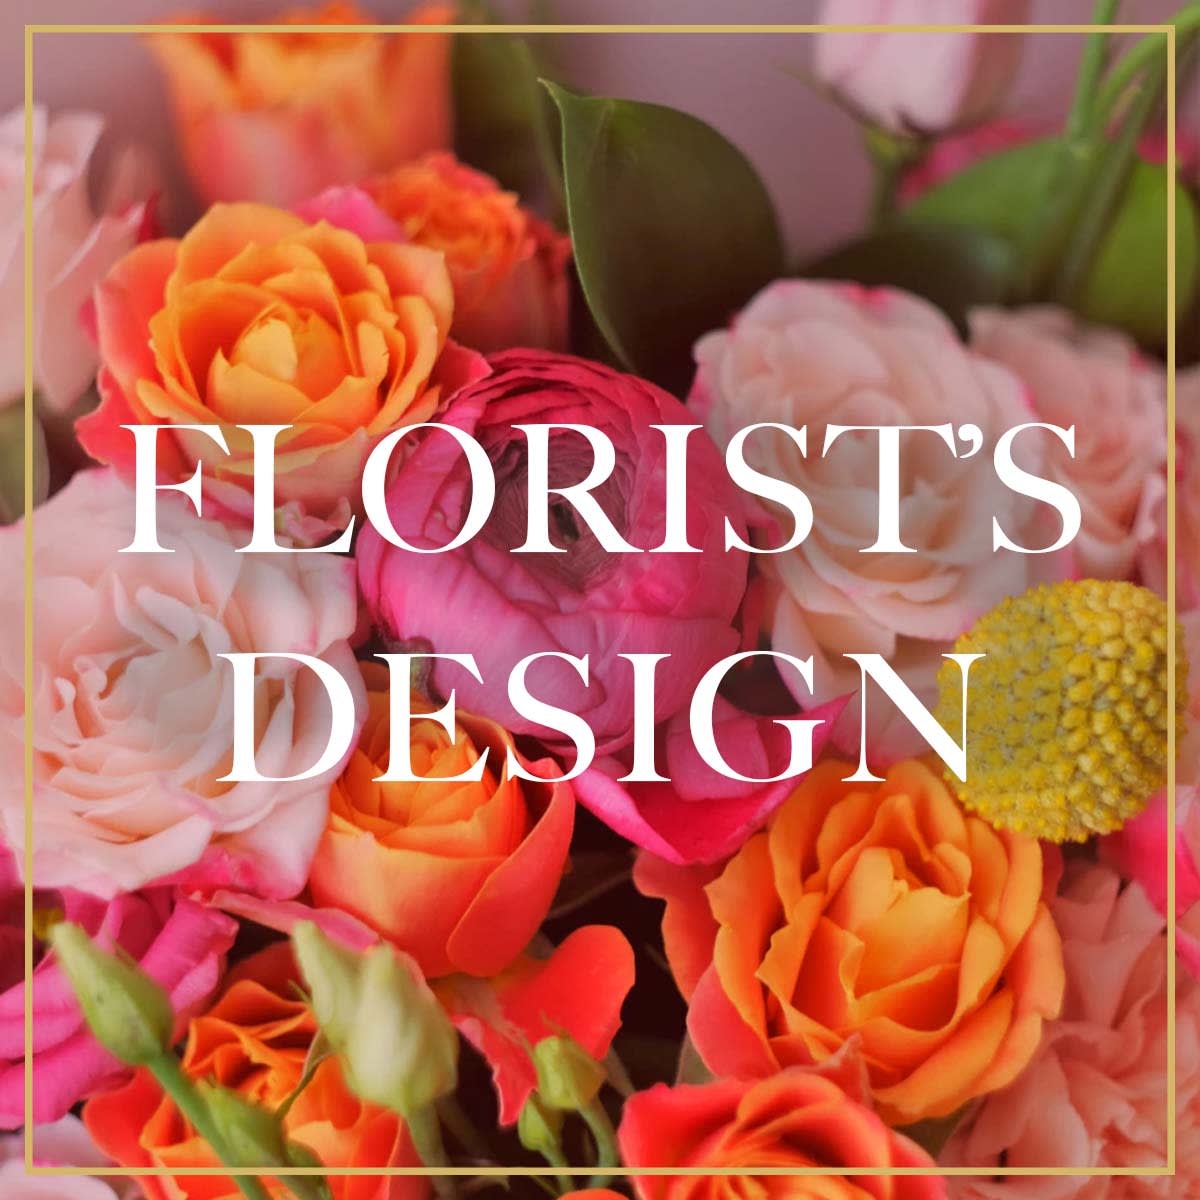 About Us - Our Story & Passion for Floristy